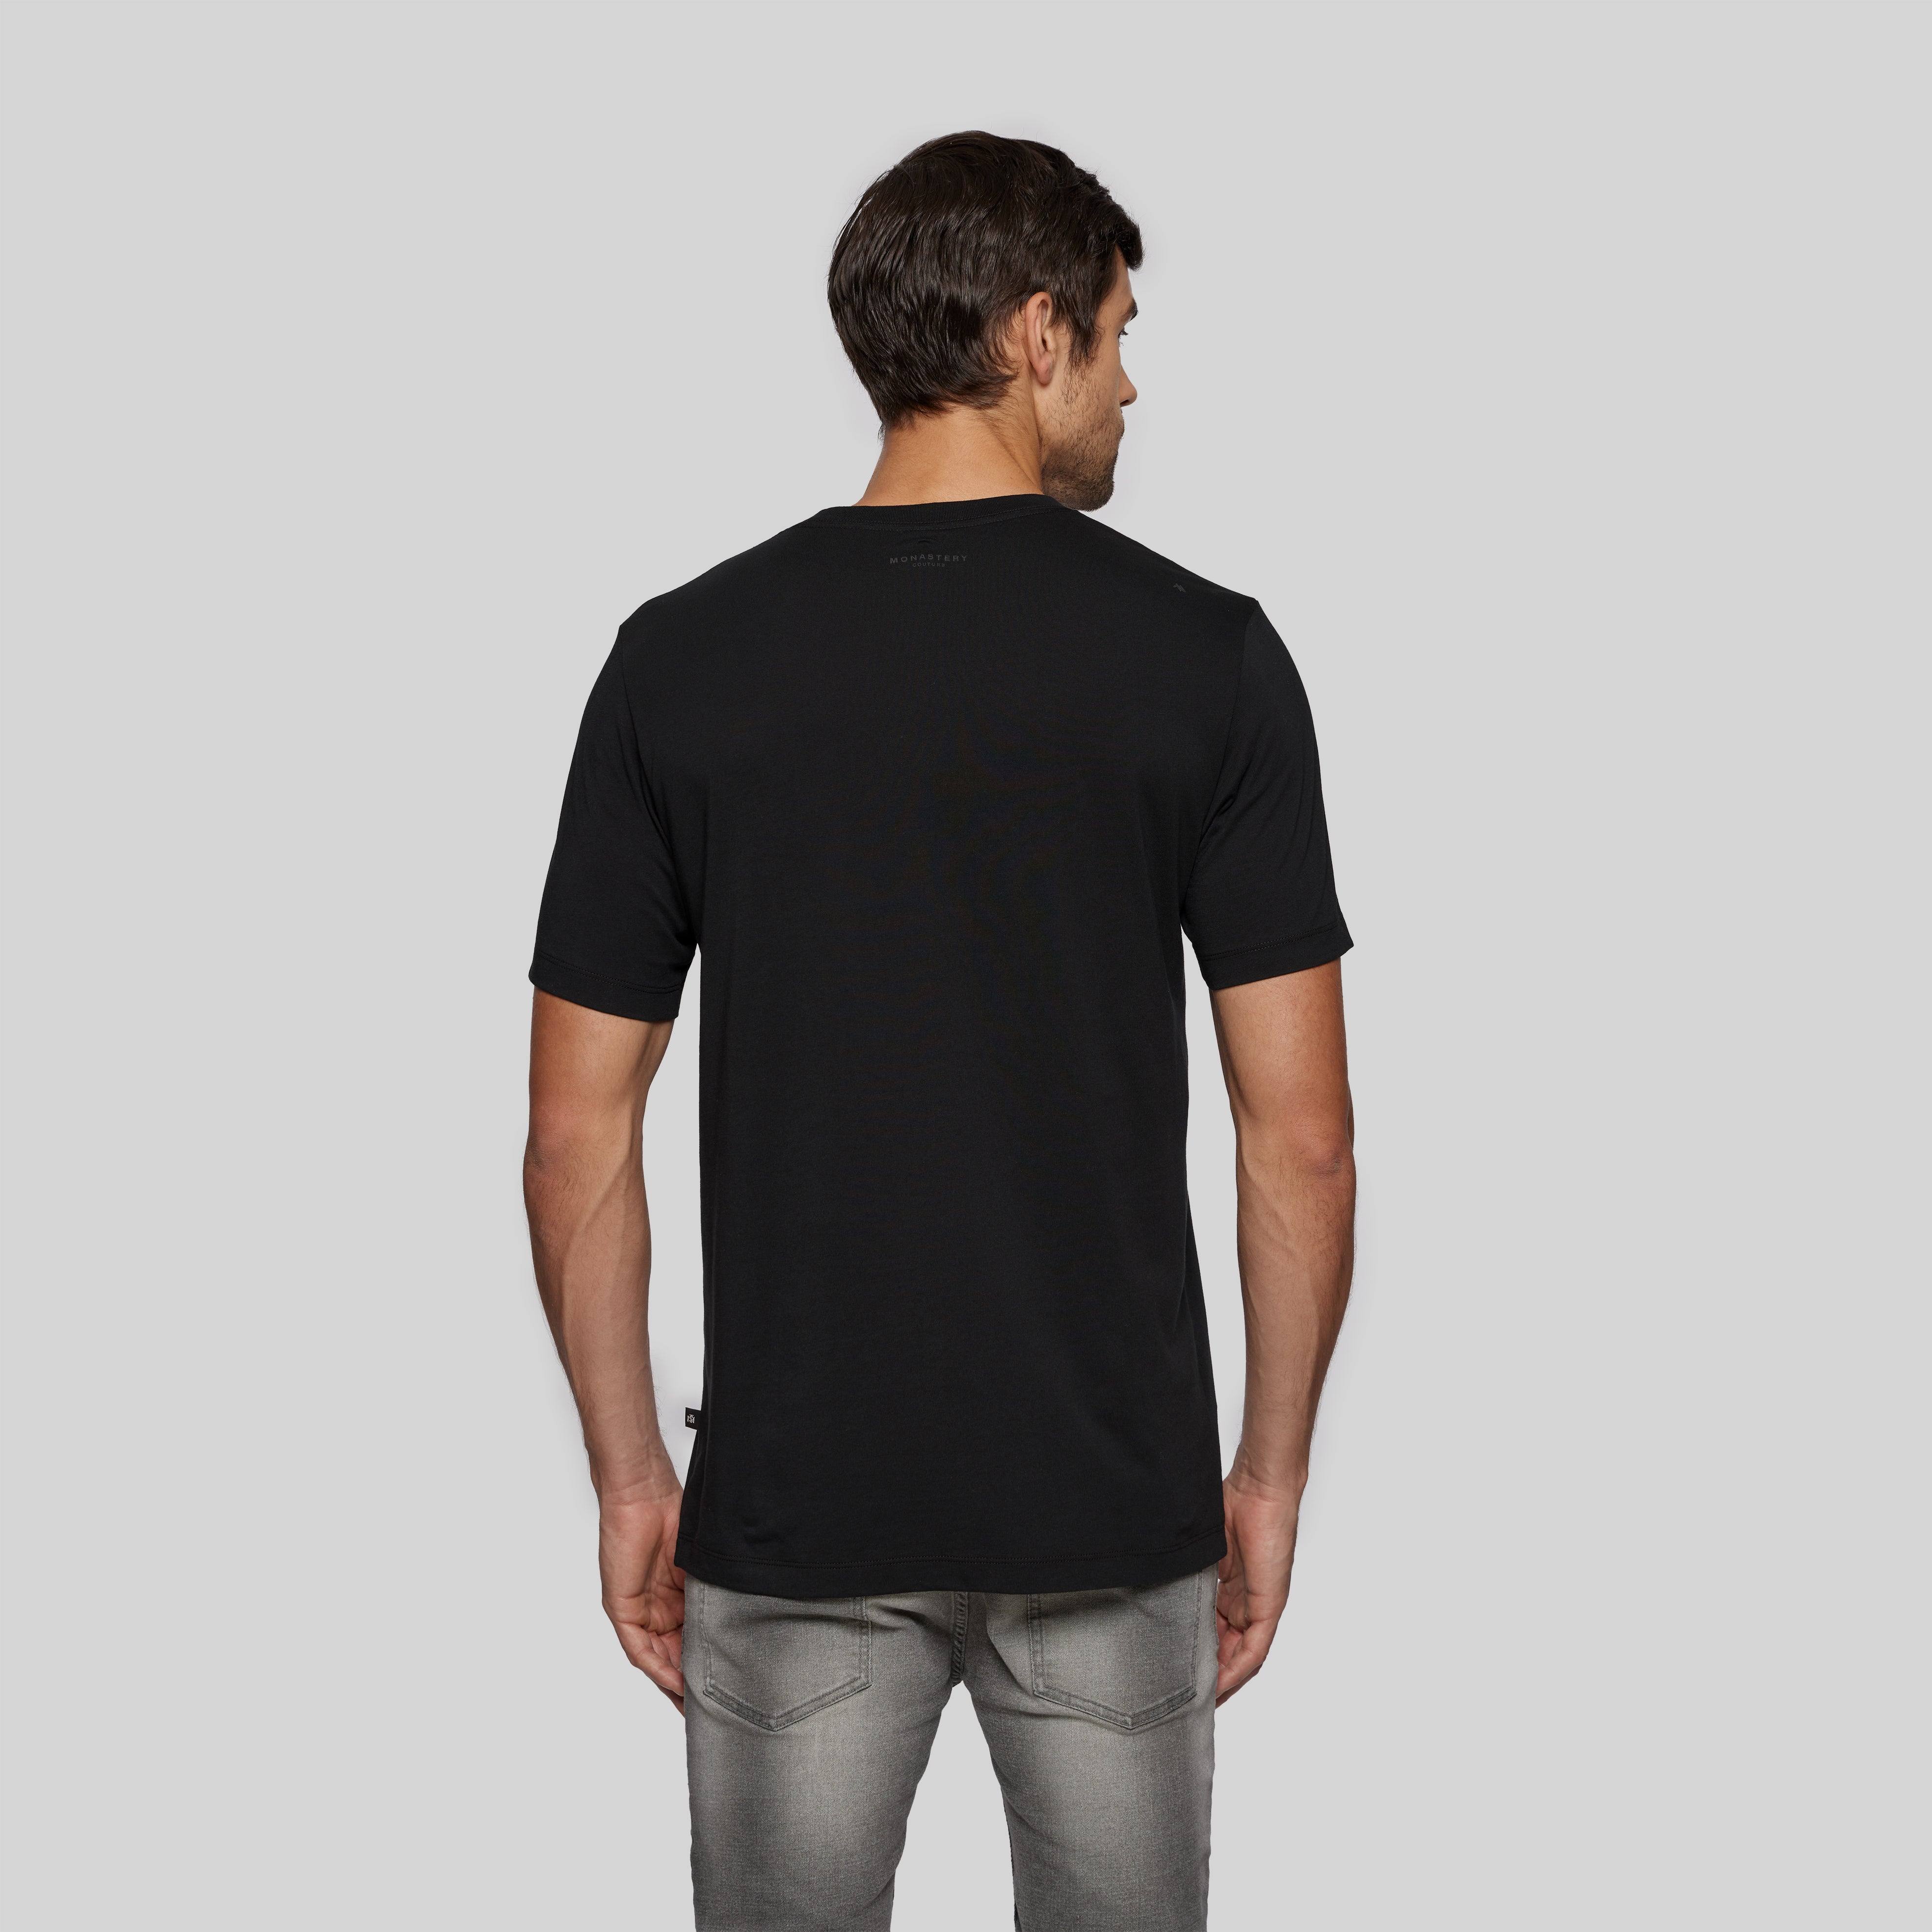 PERSEO BLACK T-SHIRT | Monastery Couture